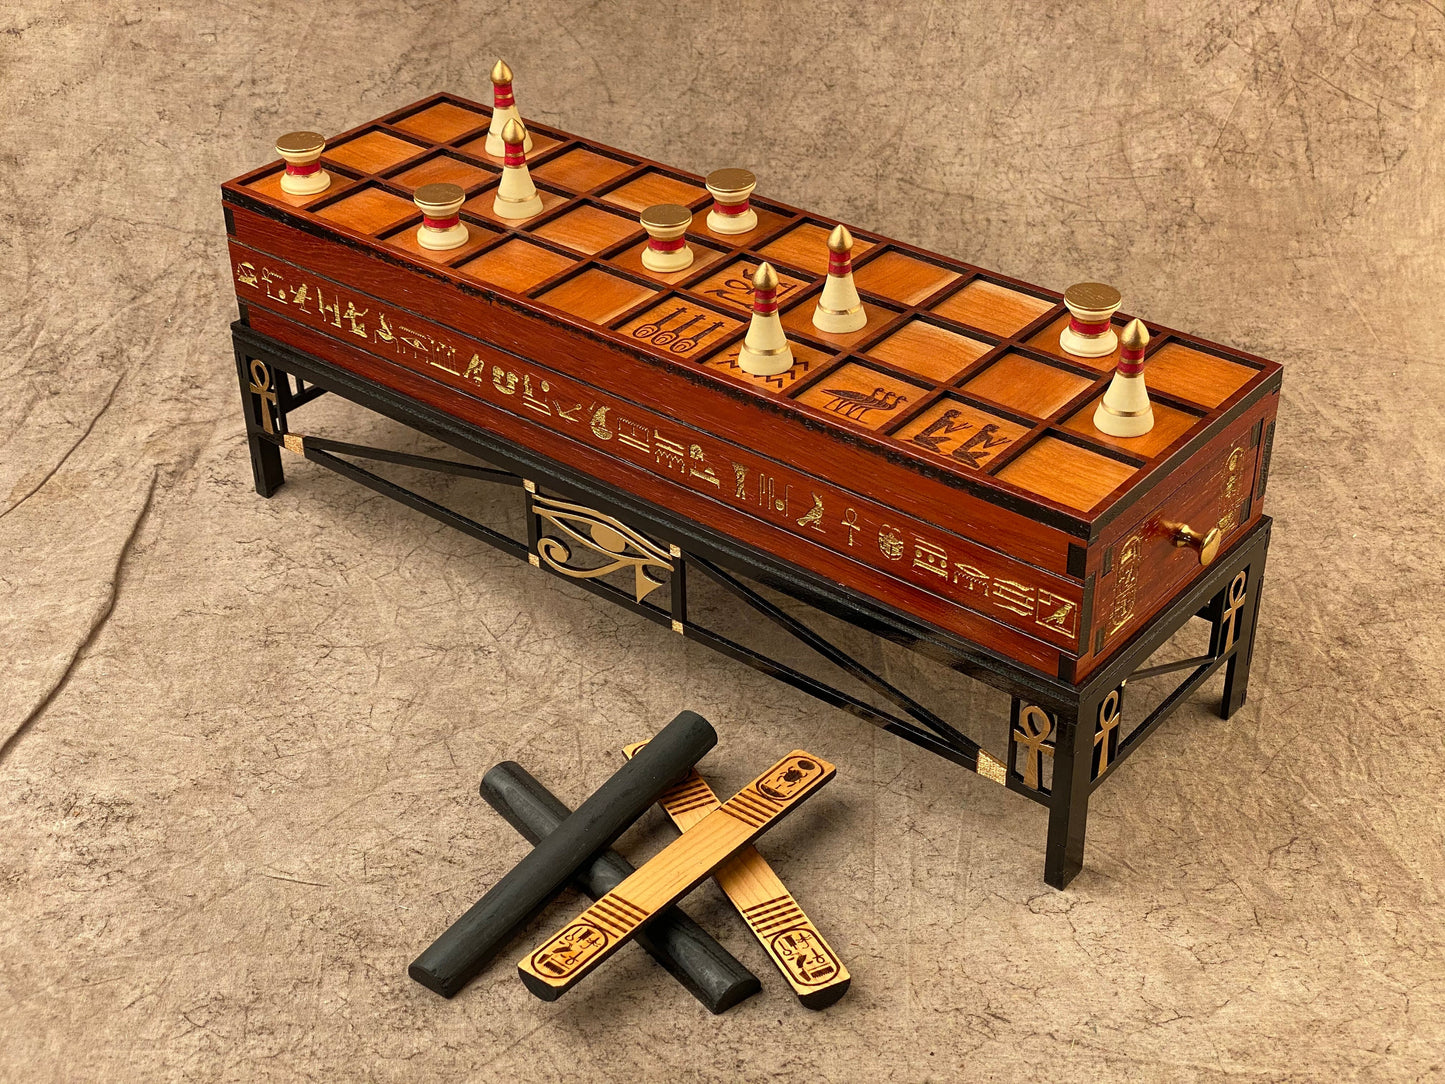 The Pharaoh's SENET Game. The finest Ancient Egyptian SENET Board in the World! Museum Quality, Hand Made, a finely made Heirloom.